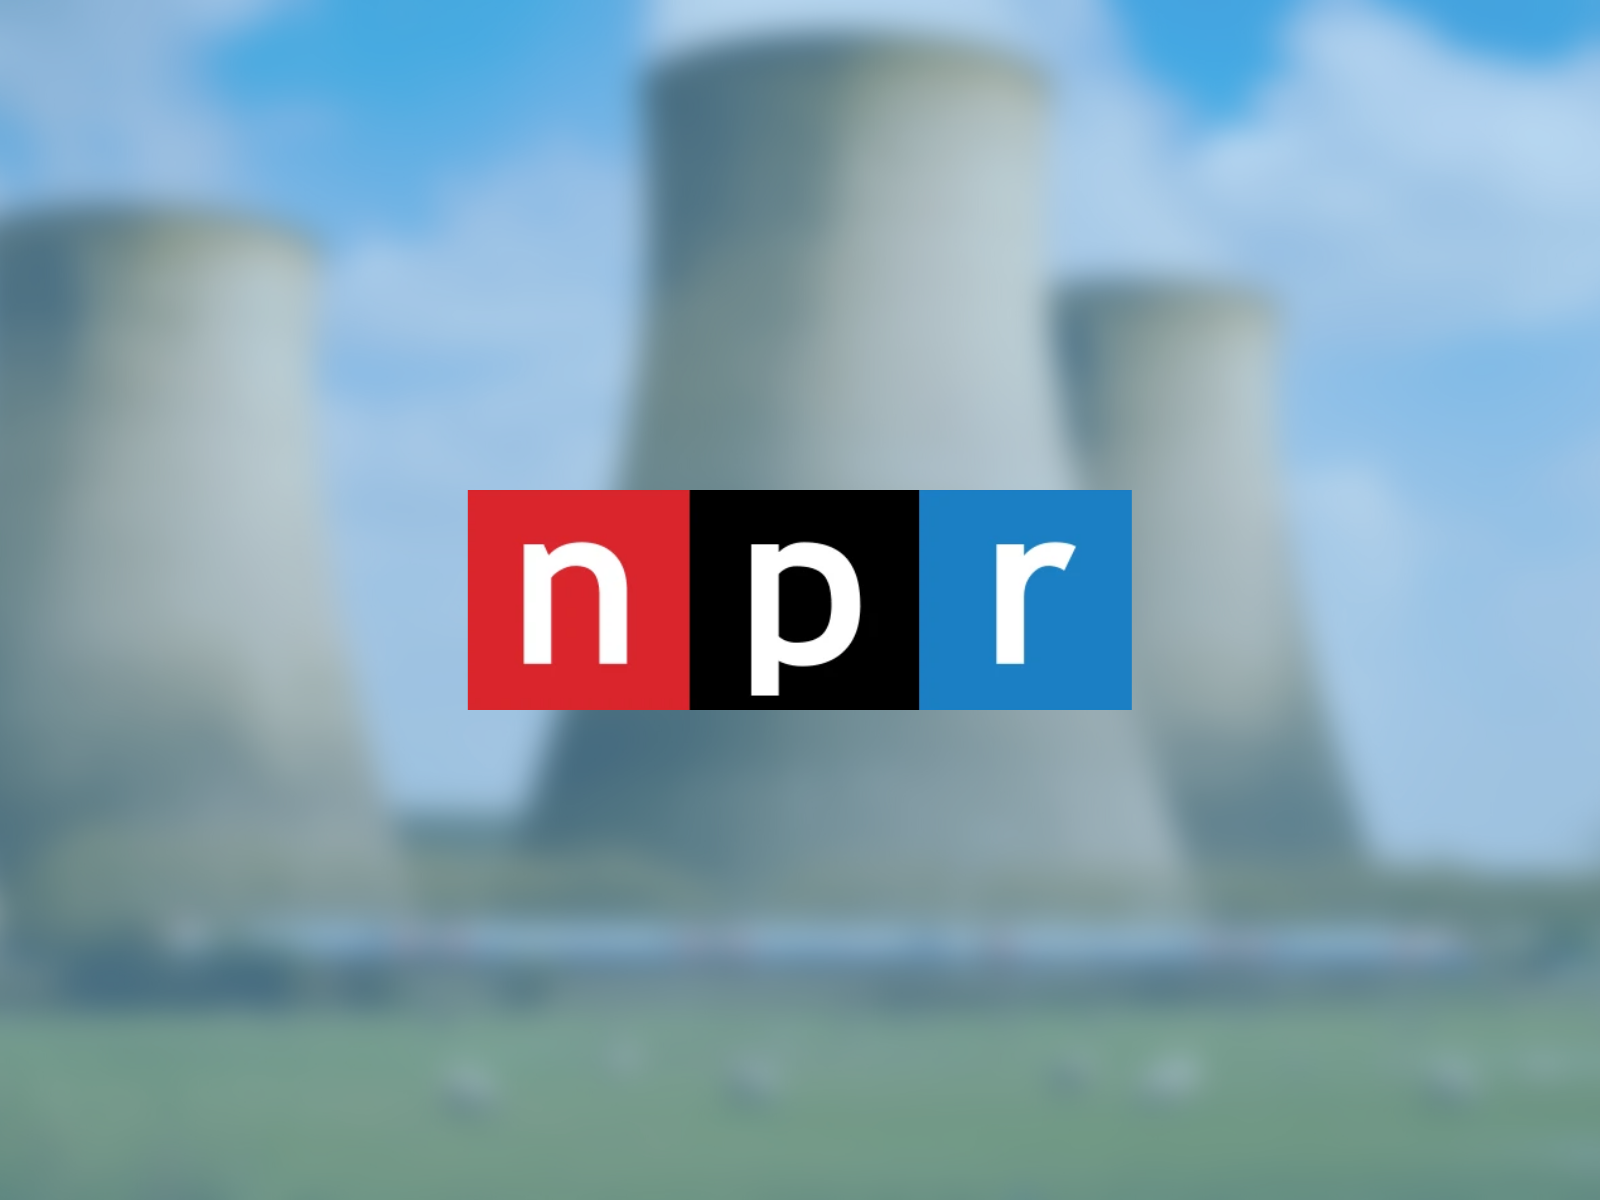 Graphic of the NPR logo with a photo of a nuclear plant in the background